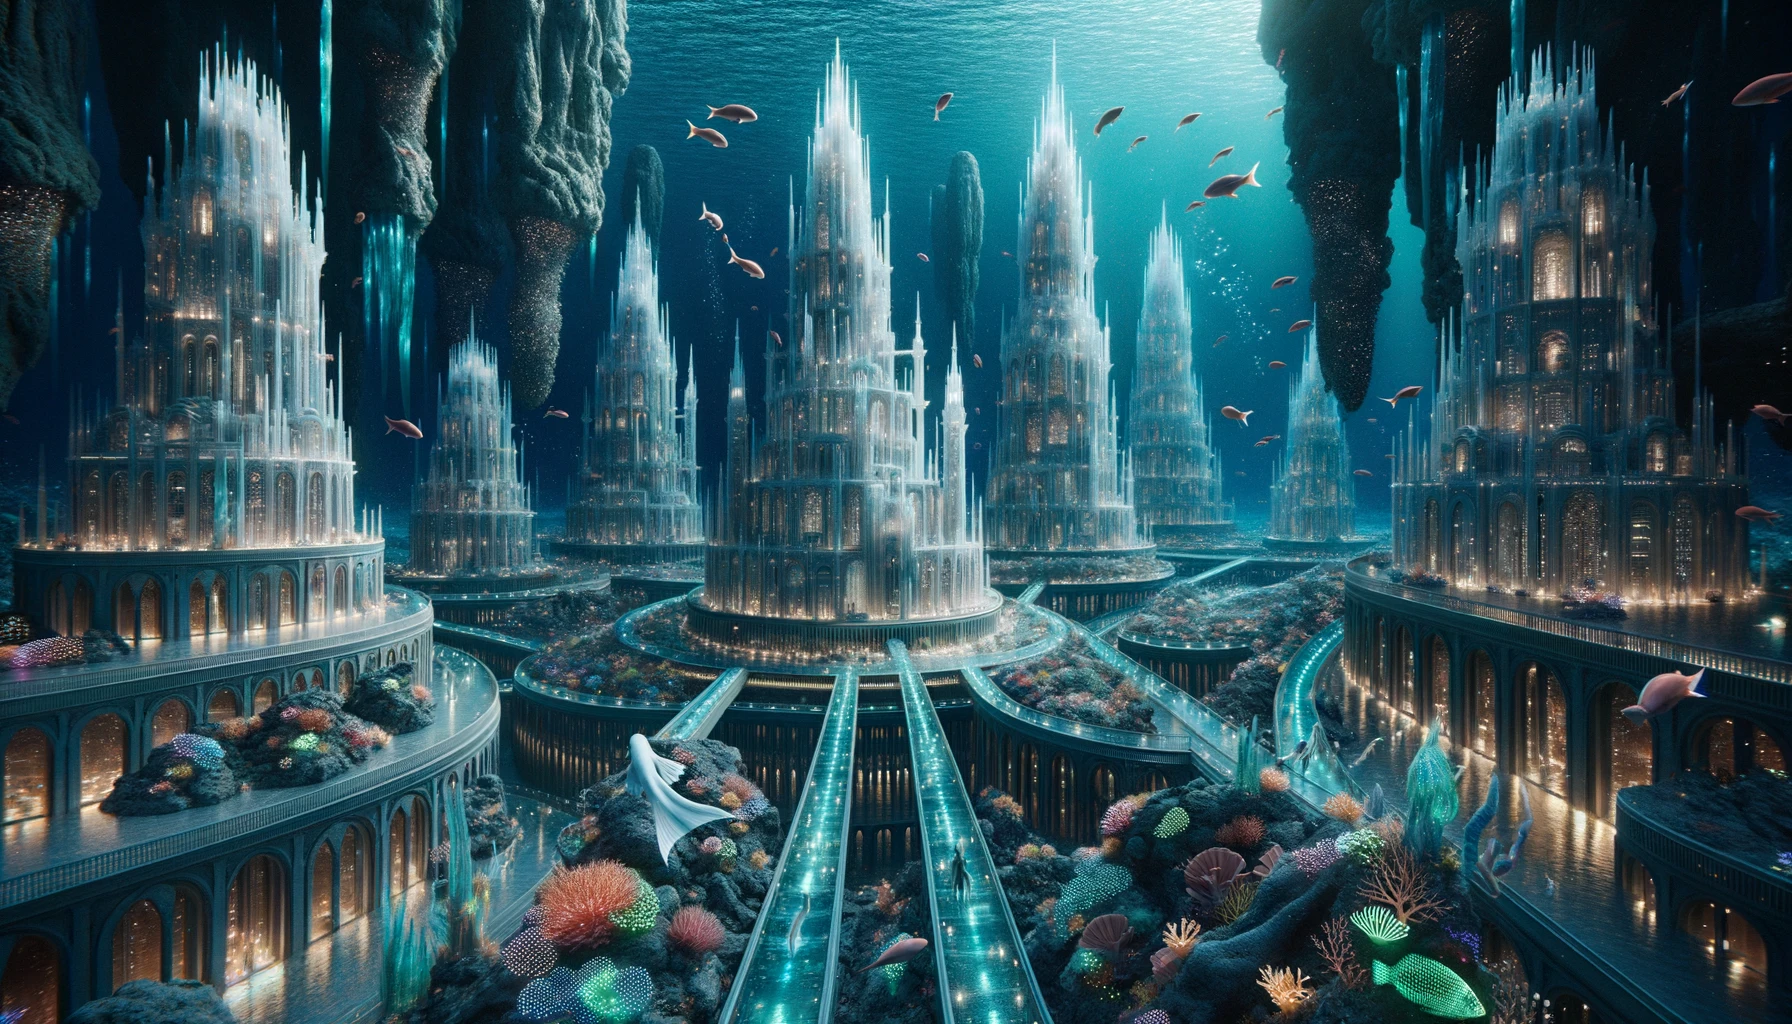 Digital render of a fantastical underwater city. Palaces, built with crystals that seem to capture and amplify light, stand tall and proud. The darkness of the deep sea is kept at bay by the myriad of bioluminescent creatures, each contributing to the city's illumination. Merfolk, with their humanoid torsos and fish-like tails, navigate the city with ease, often stopping to admire coral gardens that act as natural art installations. The city's infrastructure boasts transparent tunnels, allowing for swift and scenic commutes between different areas.